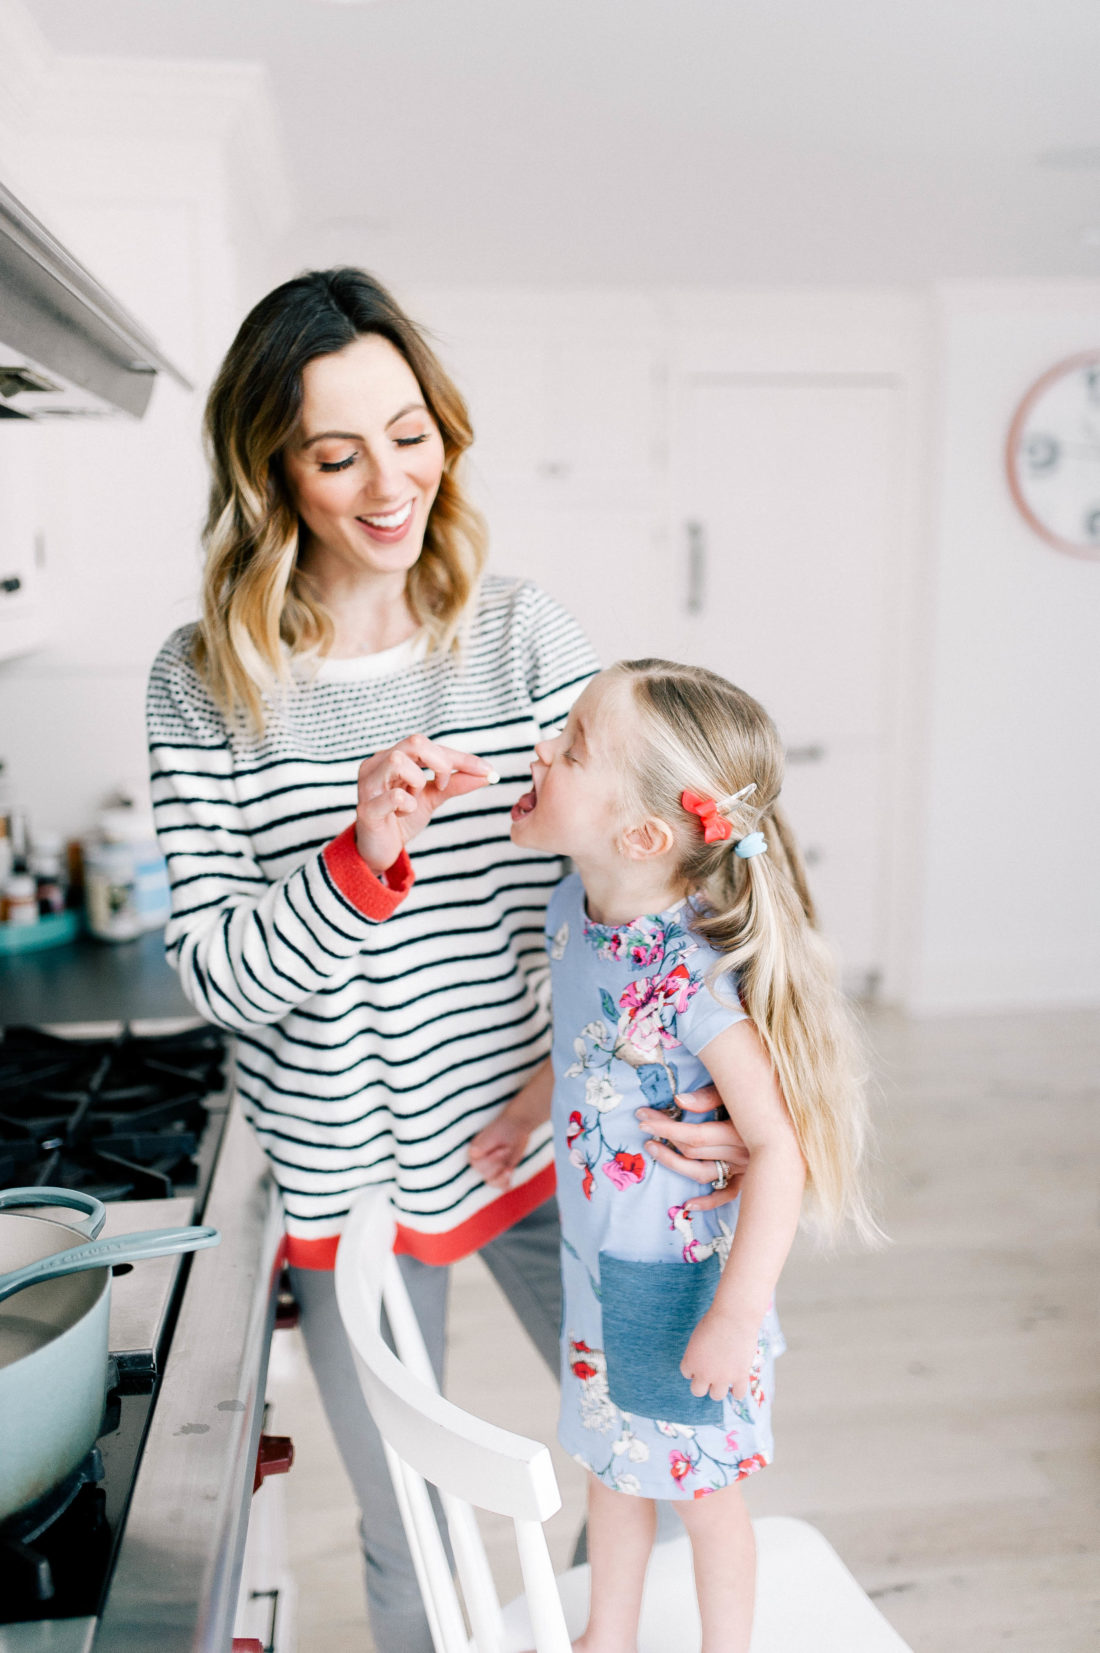 Eva Amurri Martino feeds daughter Marlowe a white chocolate chip while cooking in the kitchen at home